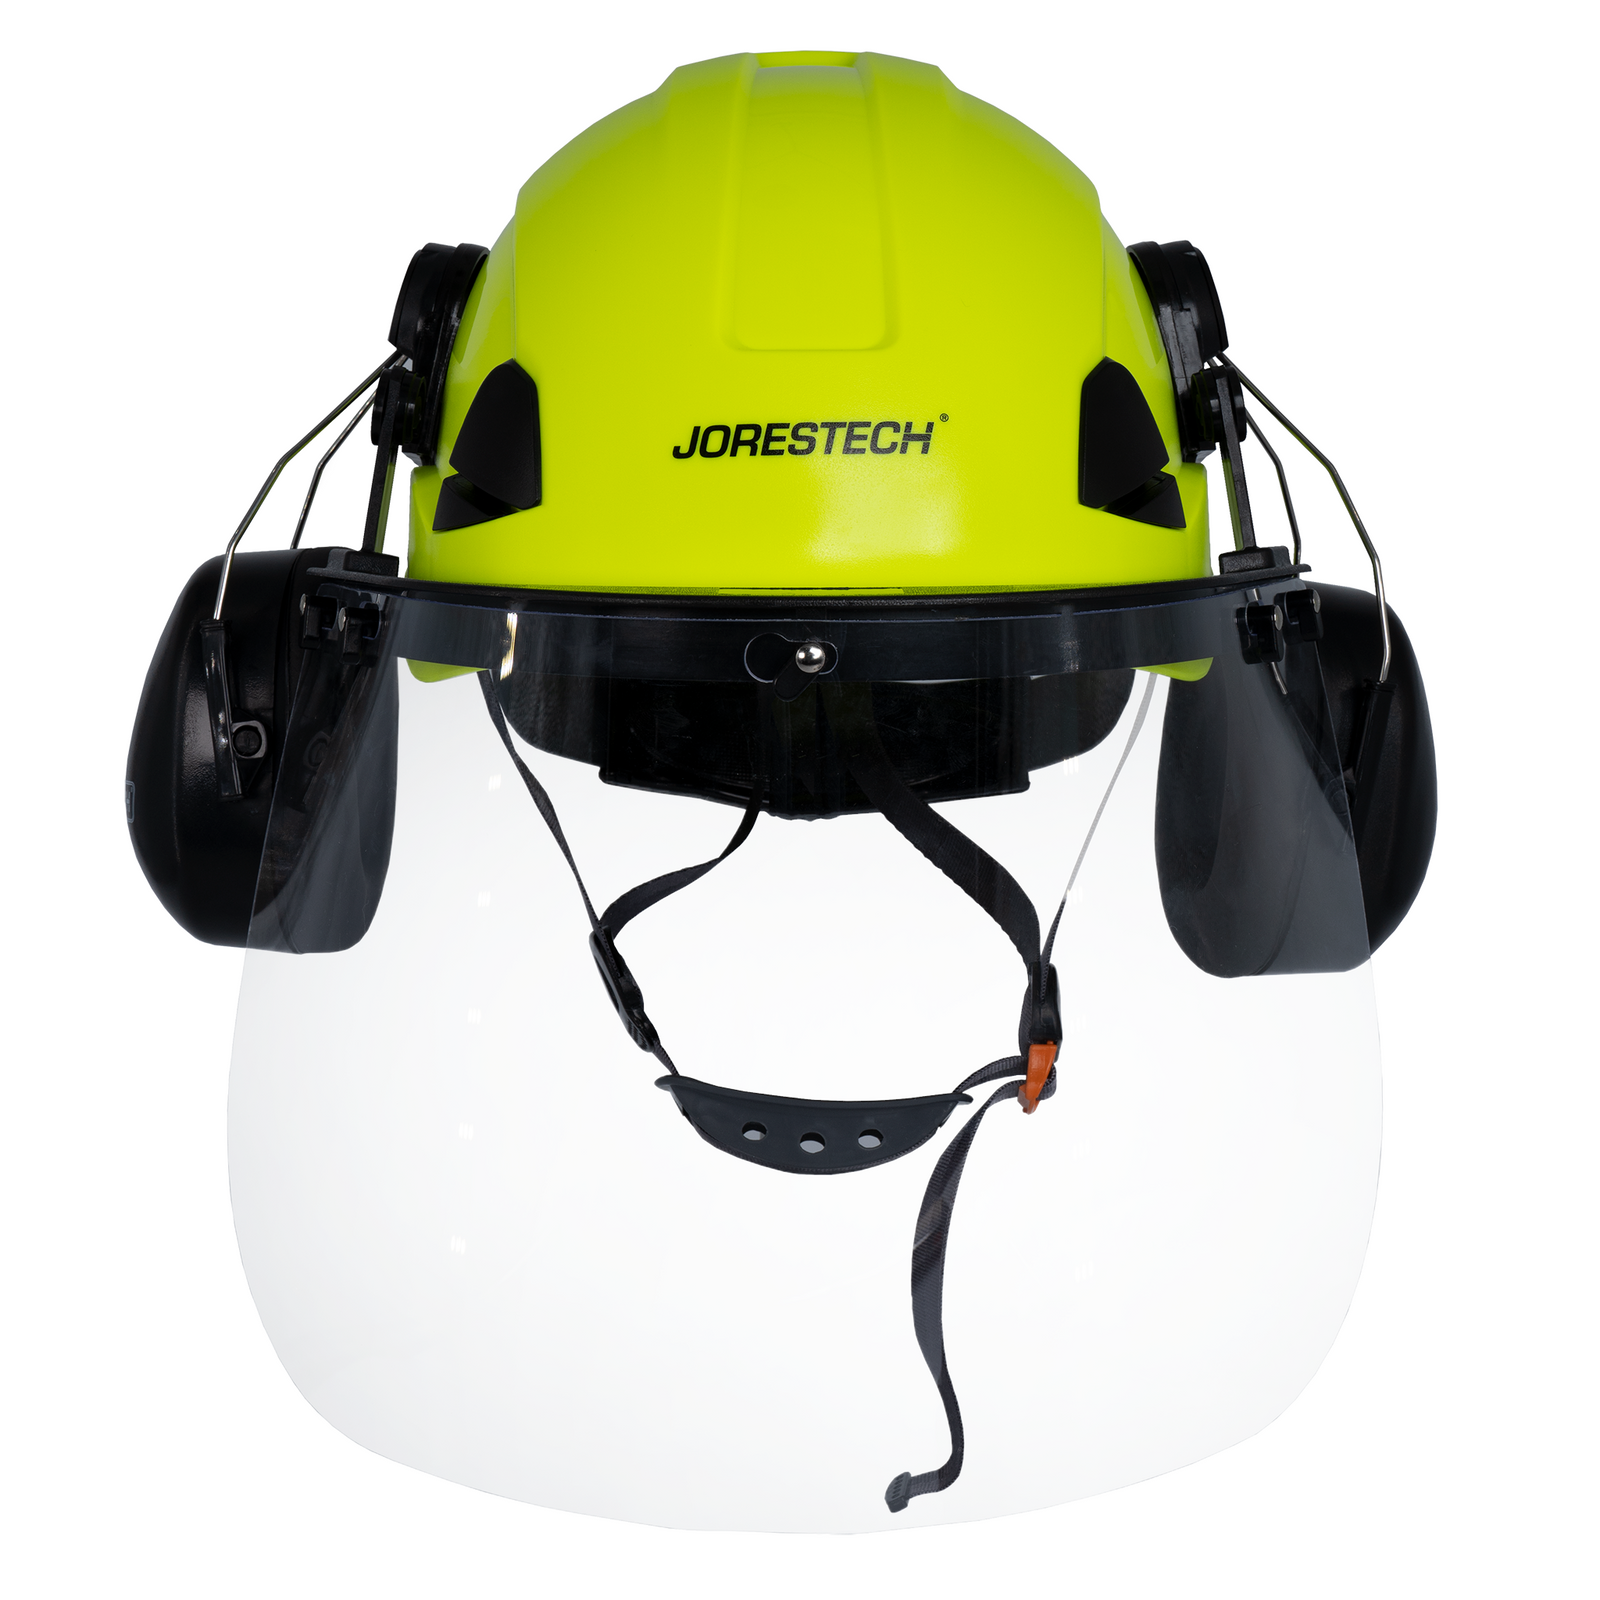 Front view of the Jorestech orange 3-in-1 helmet system with mountable face shield and earmuffs